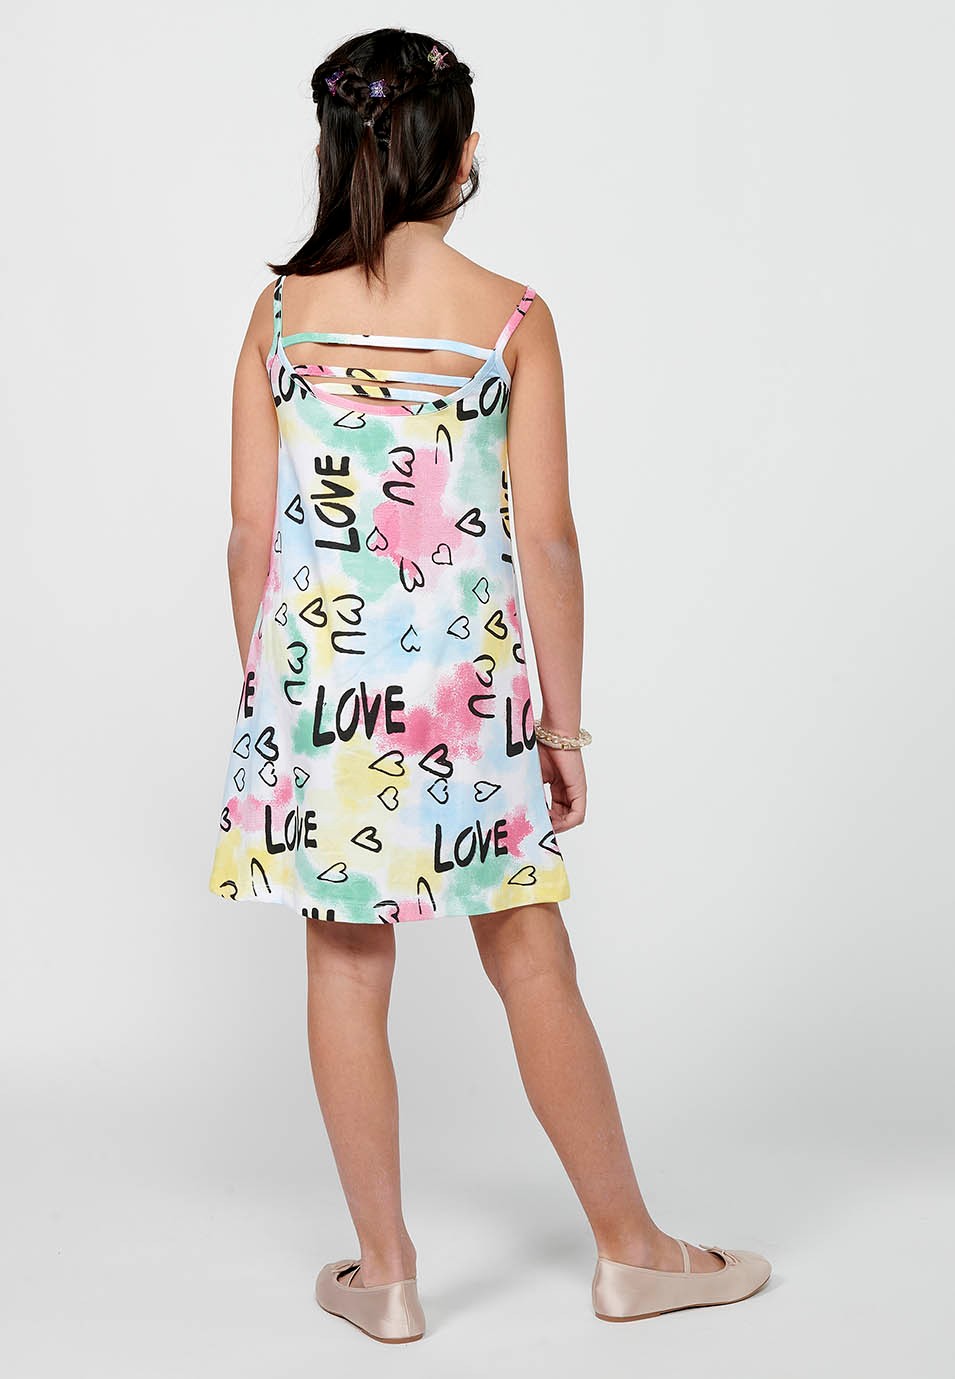 Short strap dress with Detail on the back in Multicolor for Girls 7